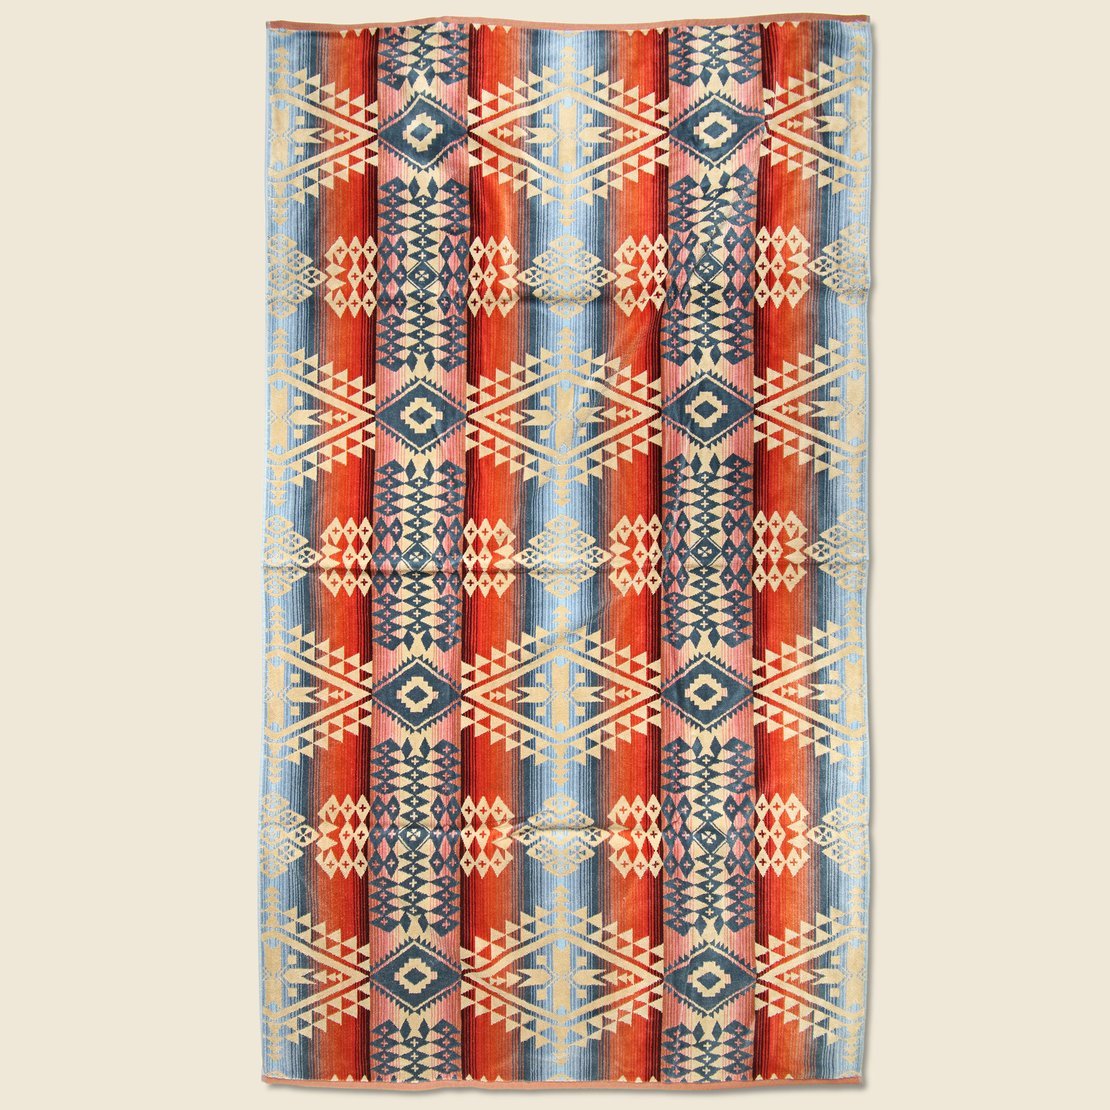 Canyonlands Towel - Red/Blue - Pendleton - STAG Provisions - Gift - Towel